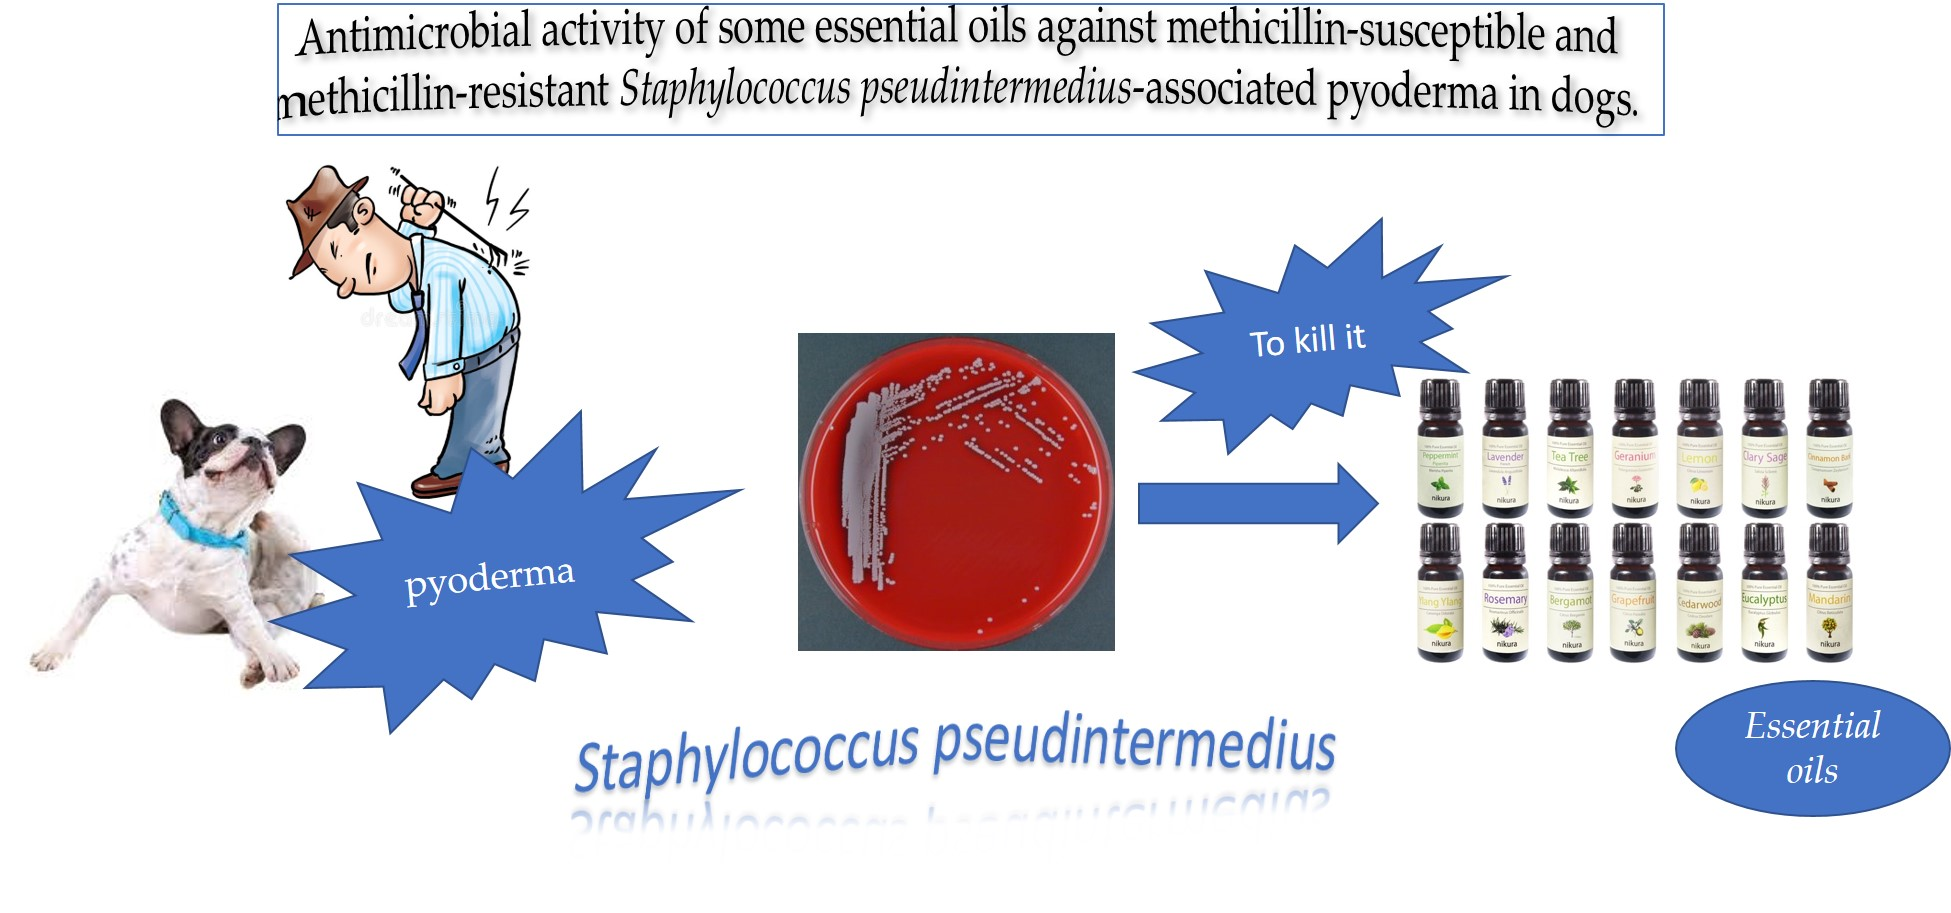 Animals | Free Full-Text | Antimicrobial Activity of Some Essential Oils  against Methicillin-Susceptible and Methicillin-Resistant Staphylococcus  pseudintermedius-Associated Pyoderma in Dogs